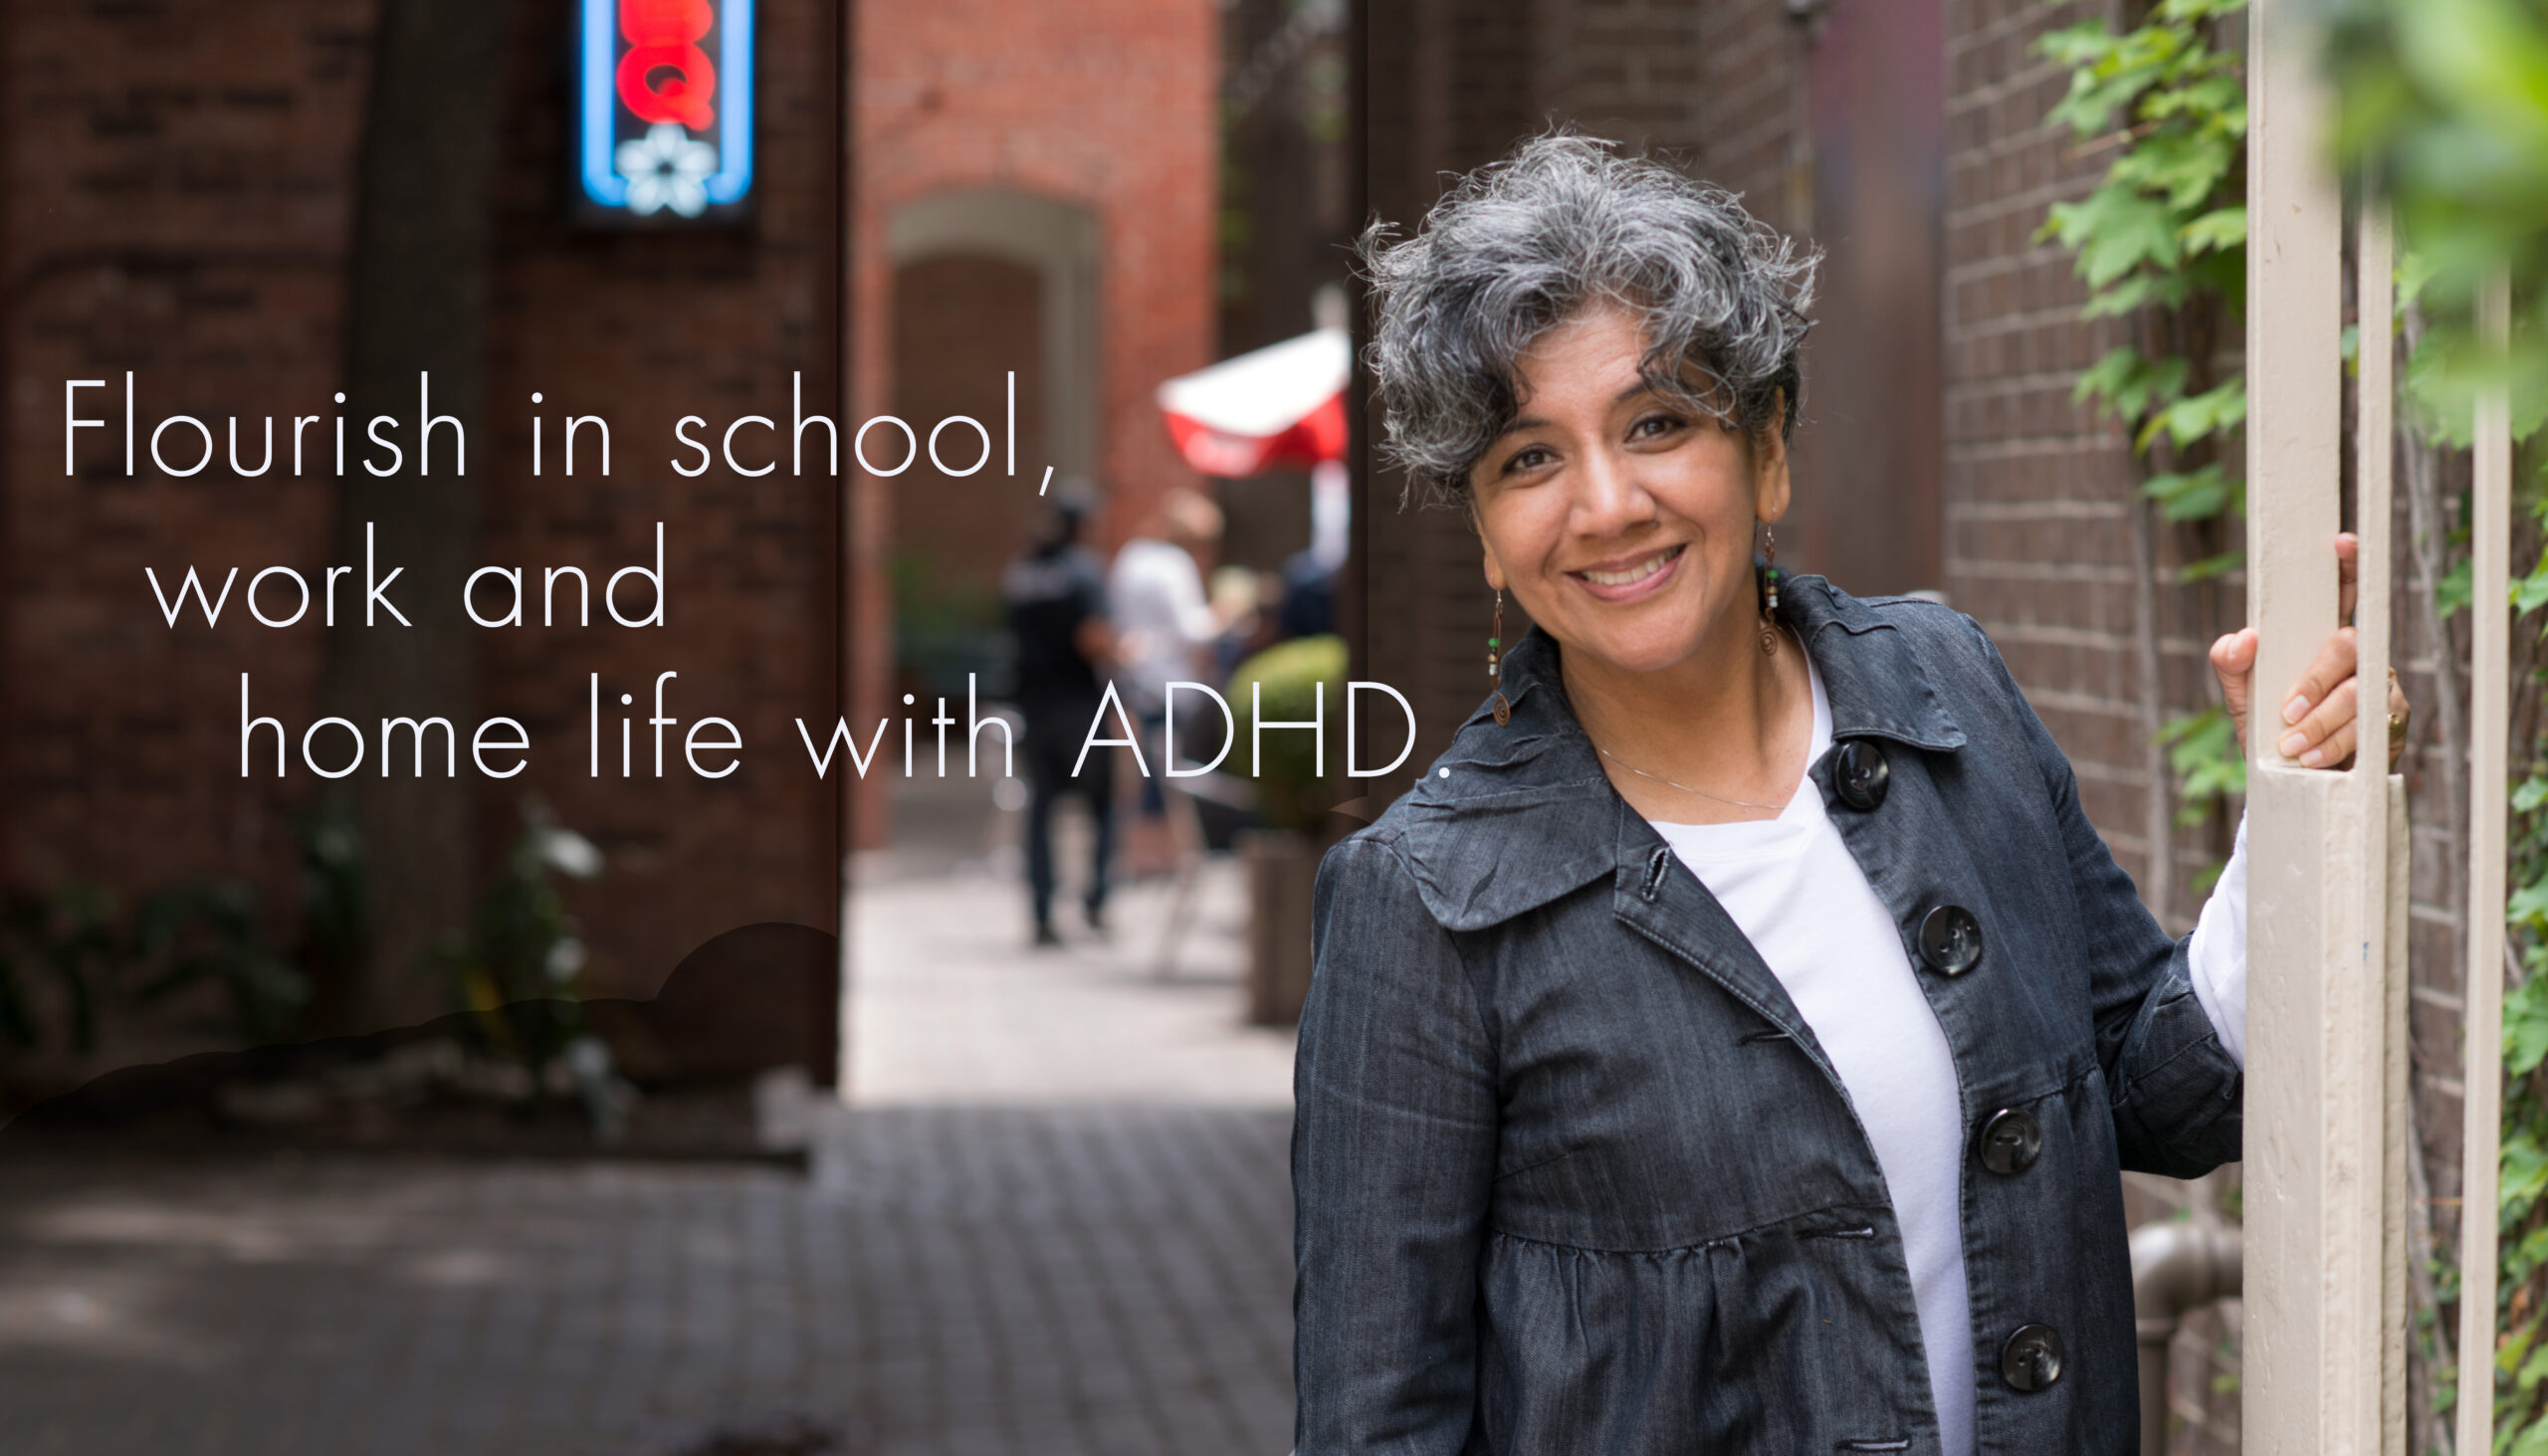 Flourish in school, work, and home life with ADHD.